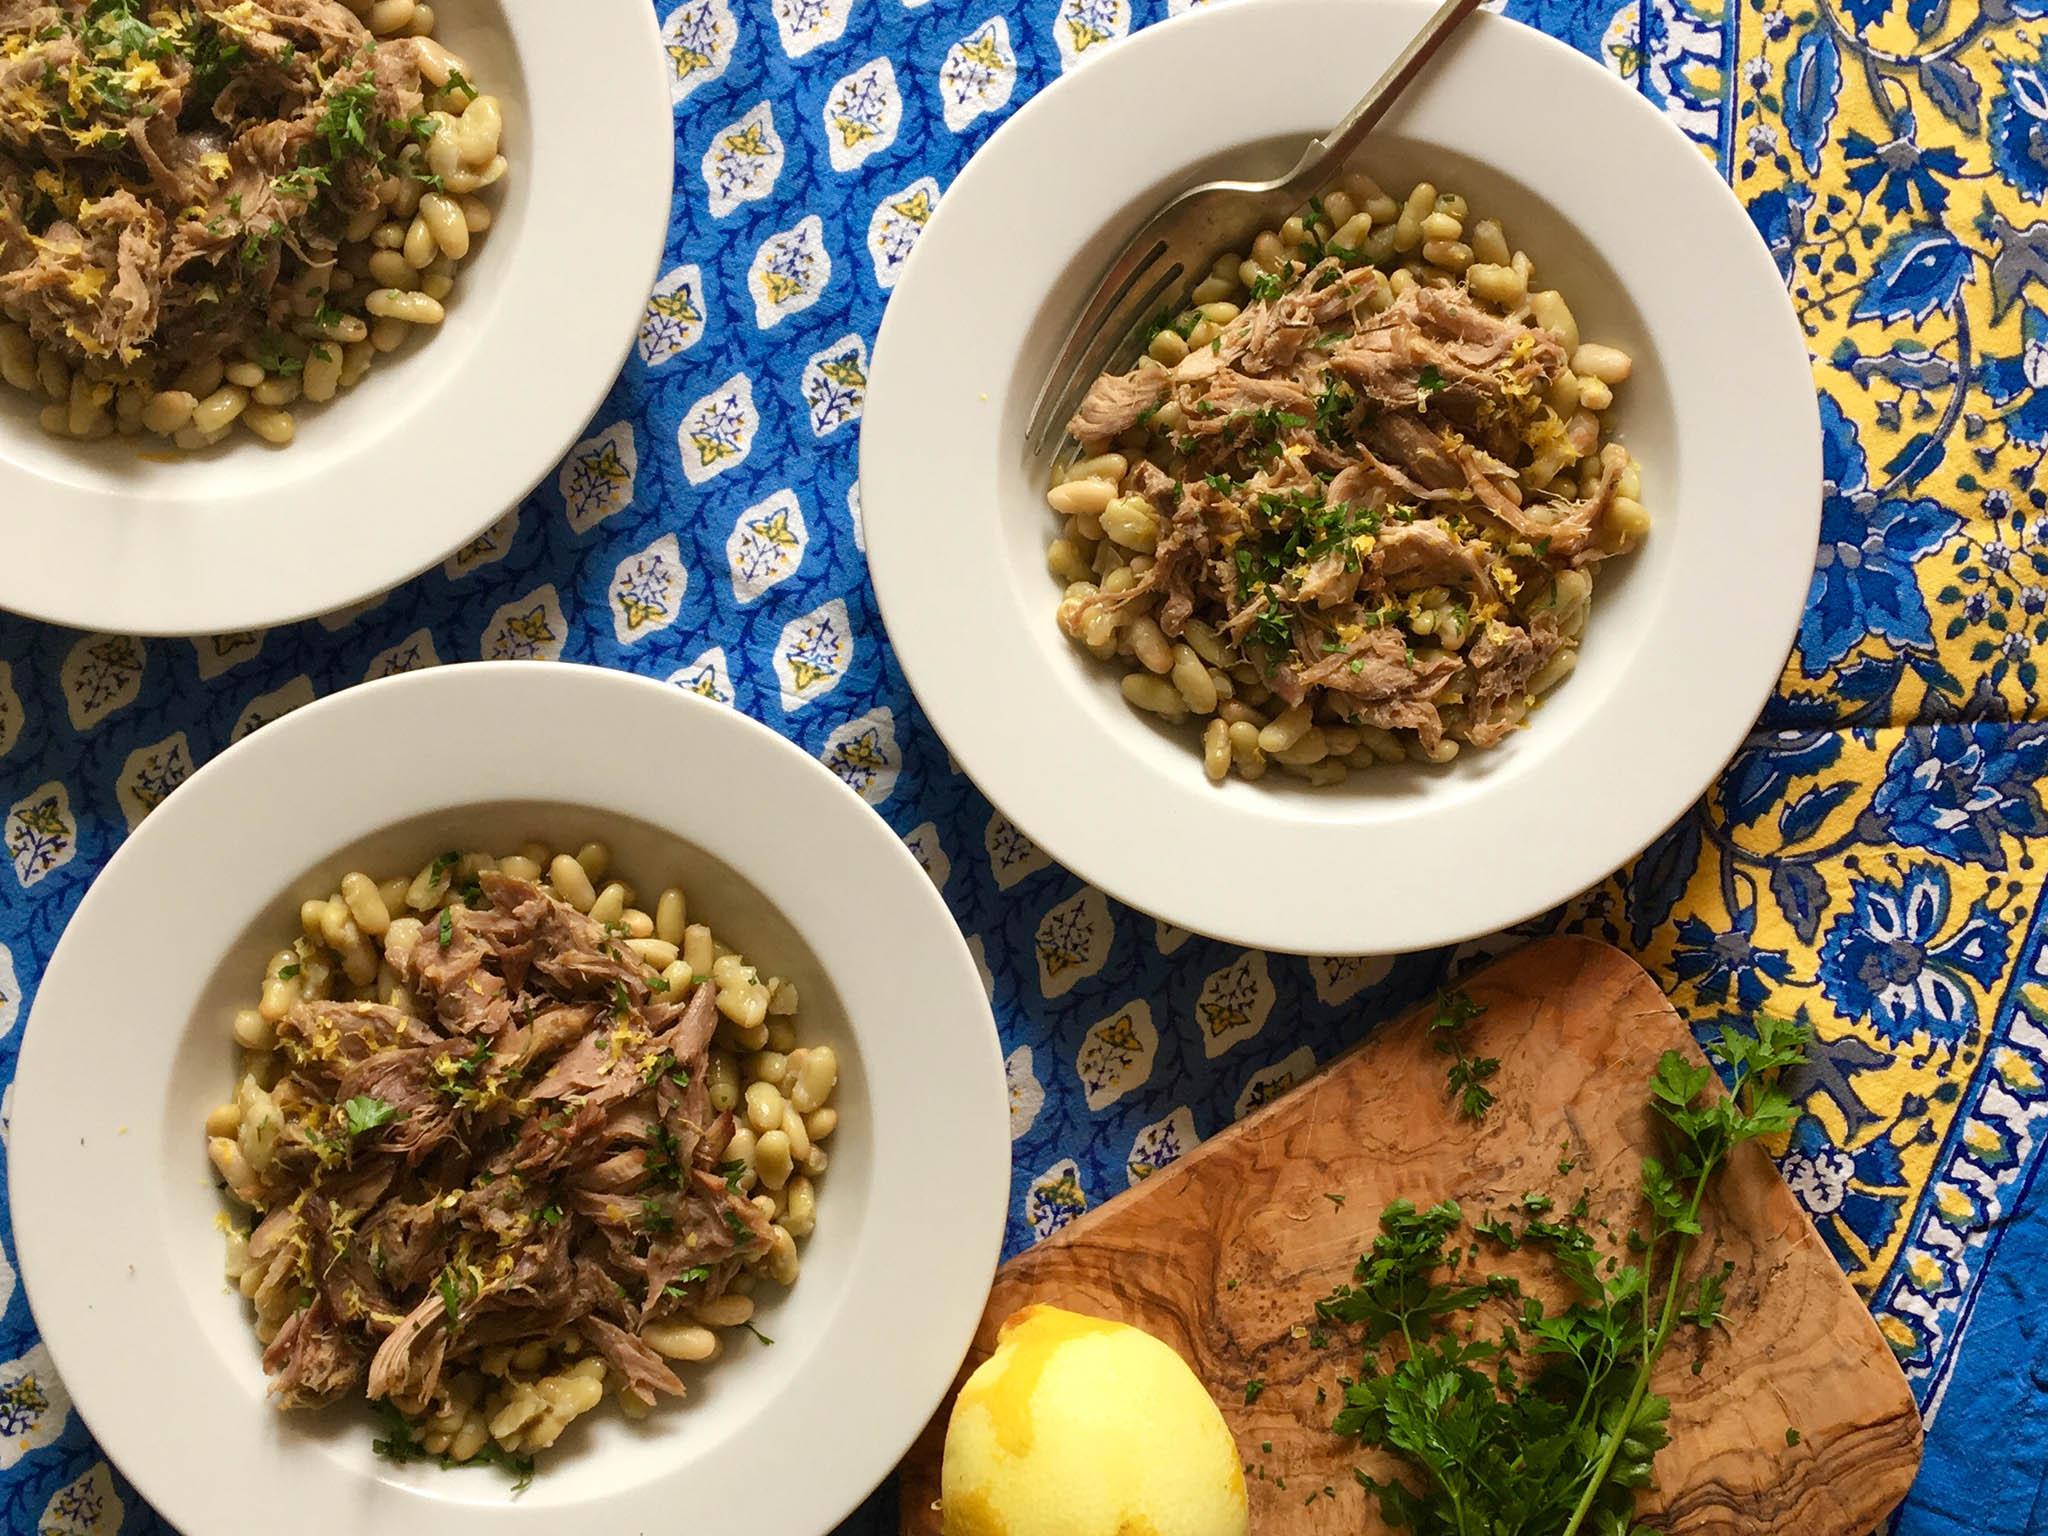 Beans, parsley and lemon make for a fresh and healthy serving